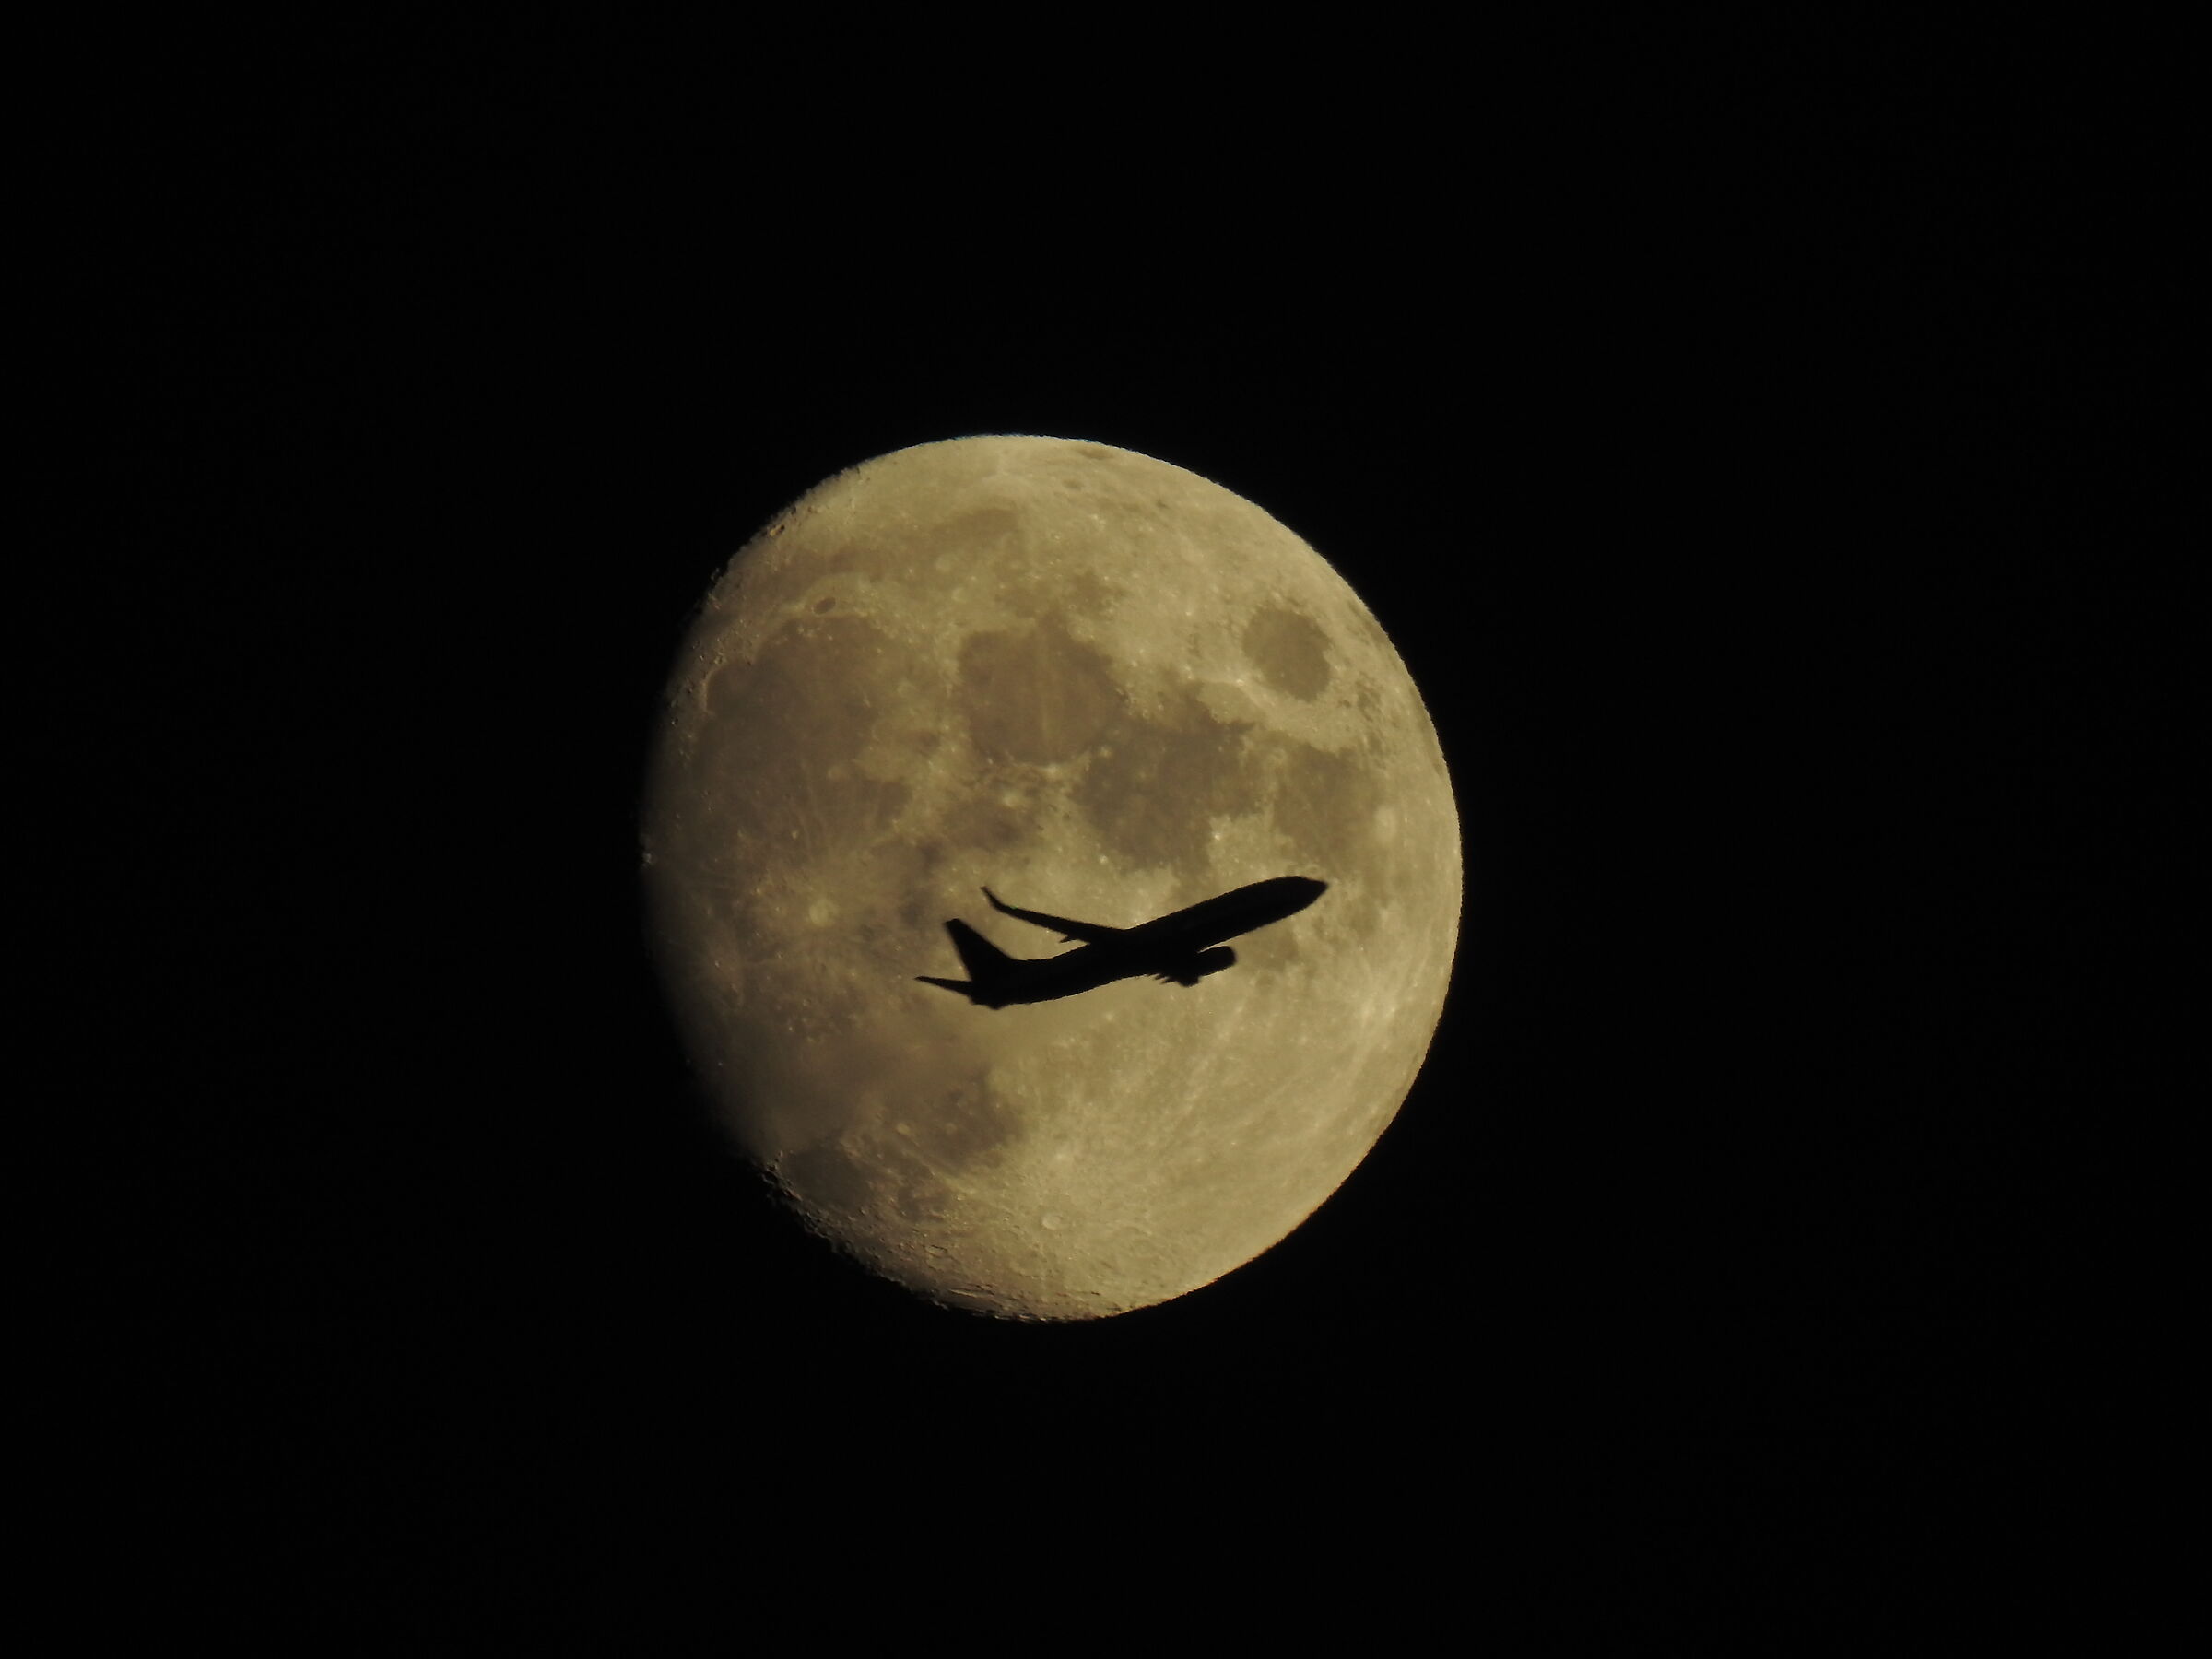 A Plane in the Moon ...